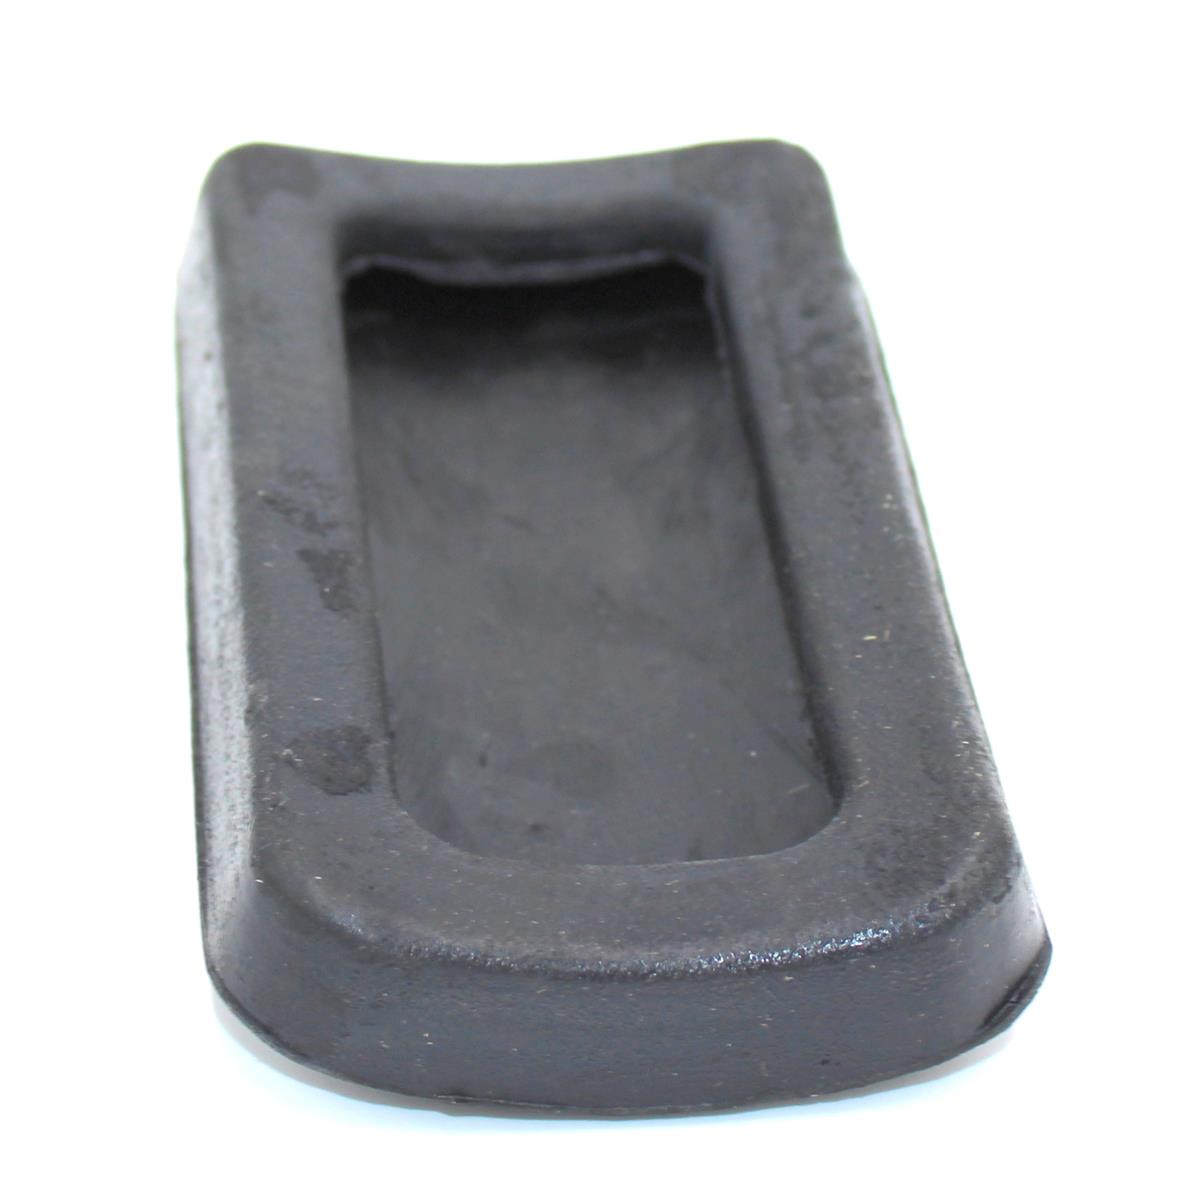 COM-3181 | COM-3181 Pedal Pad Rubber Traction Brake and Clutch M35A2 M809 Update  (8).JPG